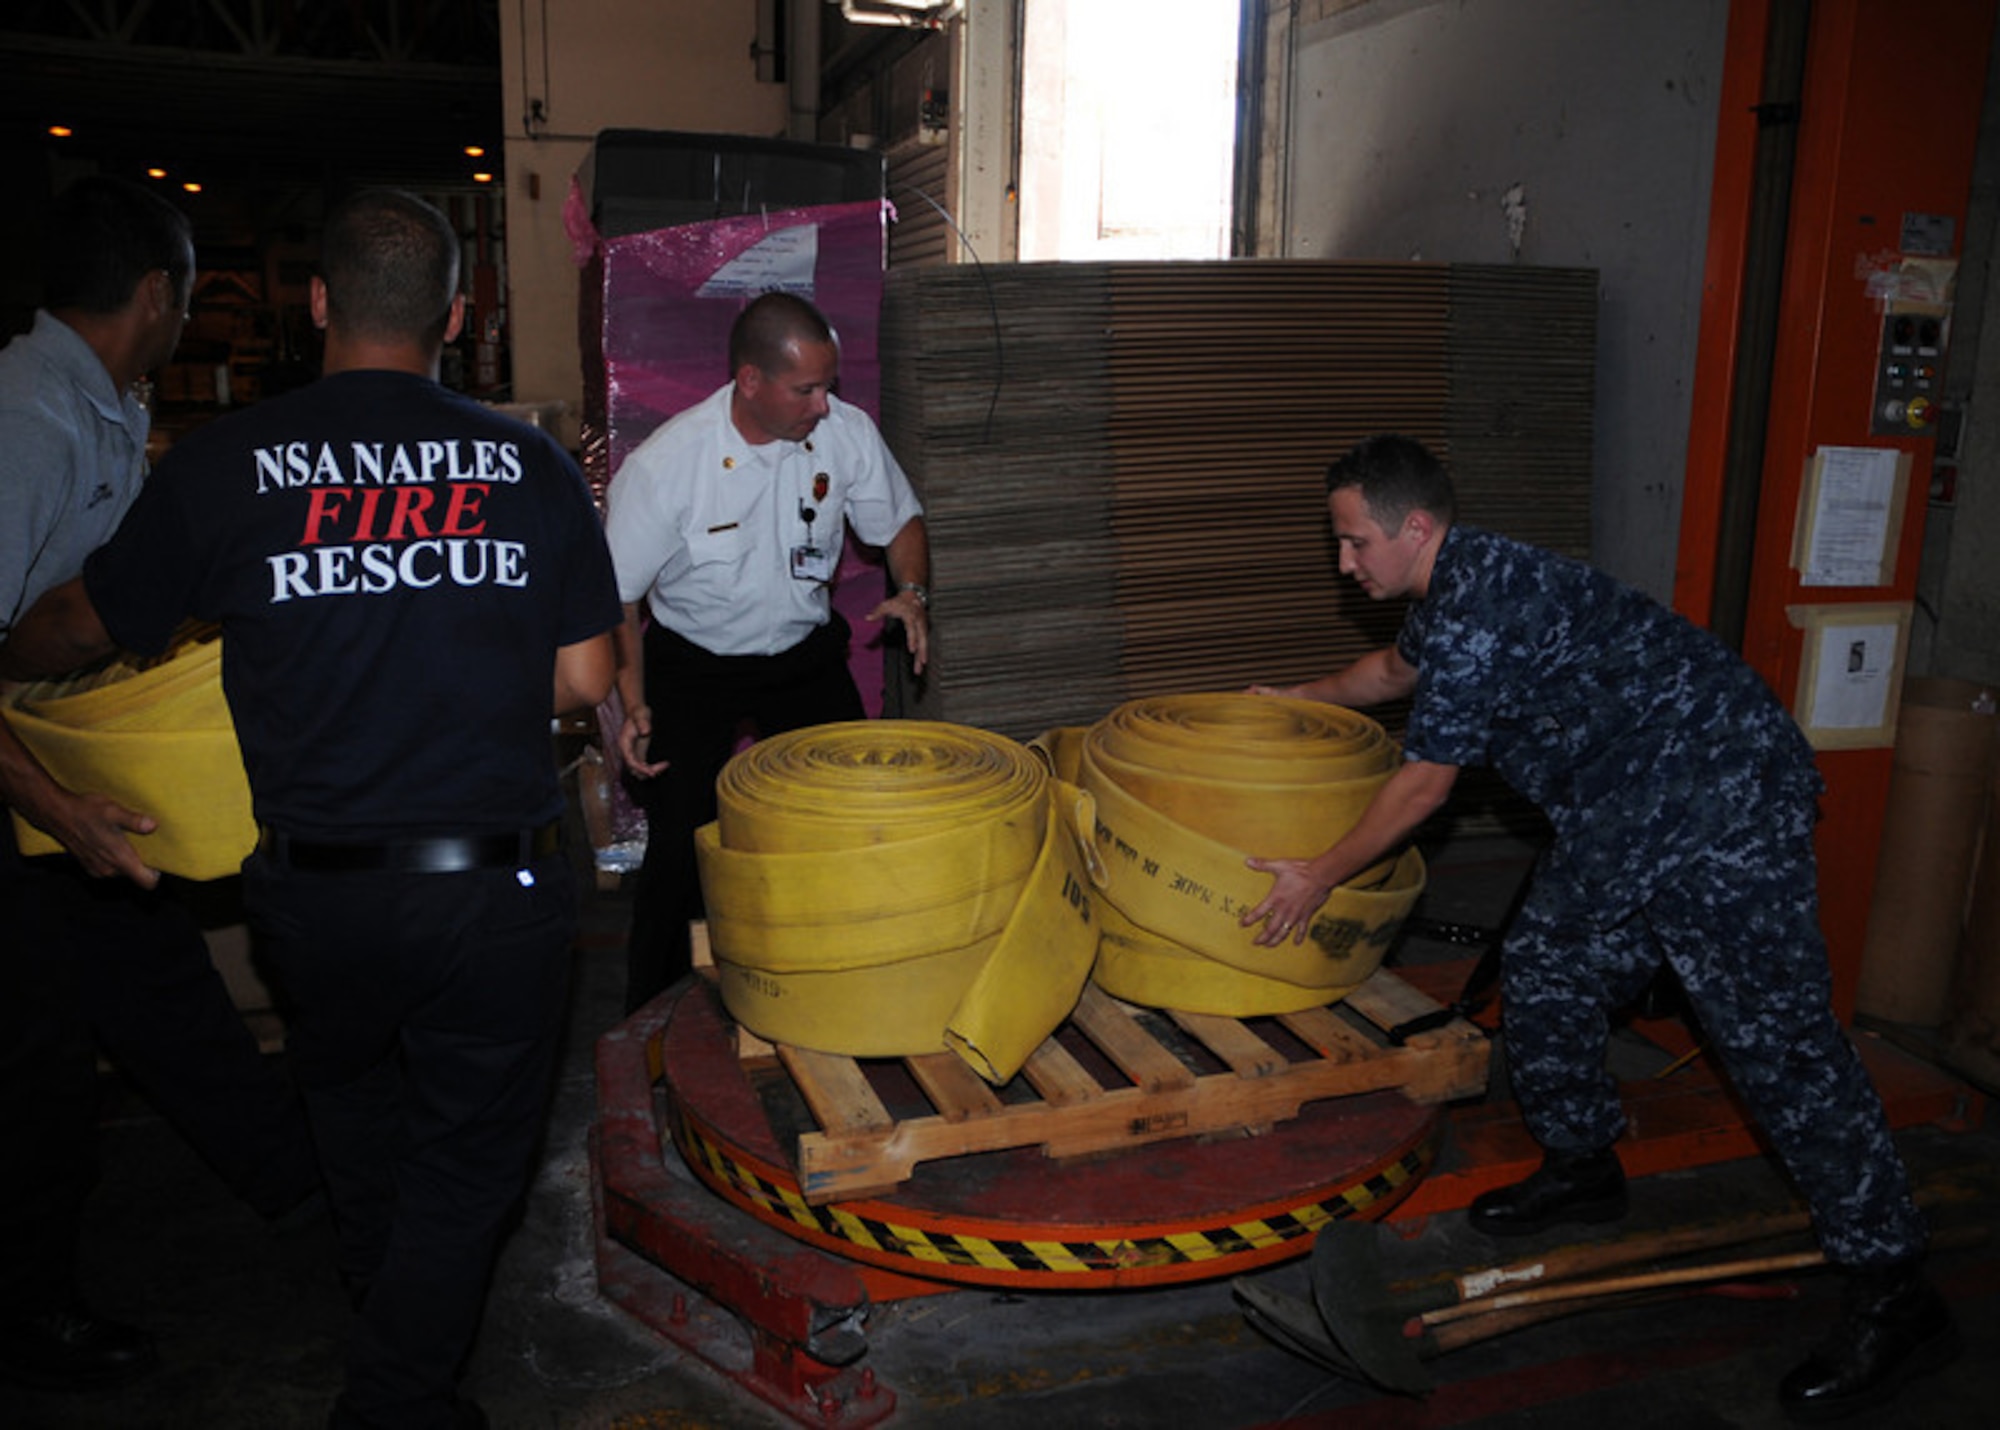 NAPLES, Italy -- Logistic Specialist 2nd Class(SW) Vitali Toptchenko, NSA Naples Lead Fire Inspector Hanz Christian, and Italian national firefighters Maurazio Patrone and Alessio Storto load a pallet of firefighting equipment destined for Russia to help combat wildfires  Aug.11, 2010. The U.S. Navy routinely provides foreign humanitarian assistance in times of crisis, in the same manner as many nations around the world. (U.S. Navy photo by Mass Communication Specialist 3rd Class Kristopher Regan)